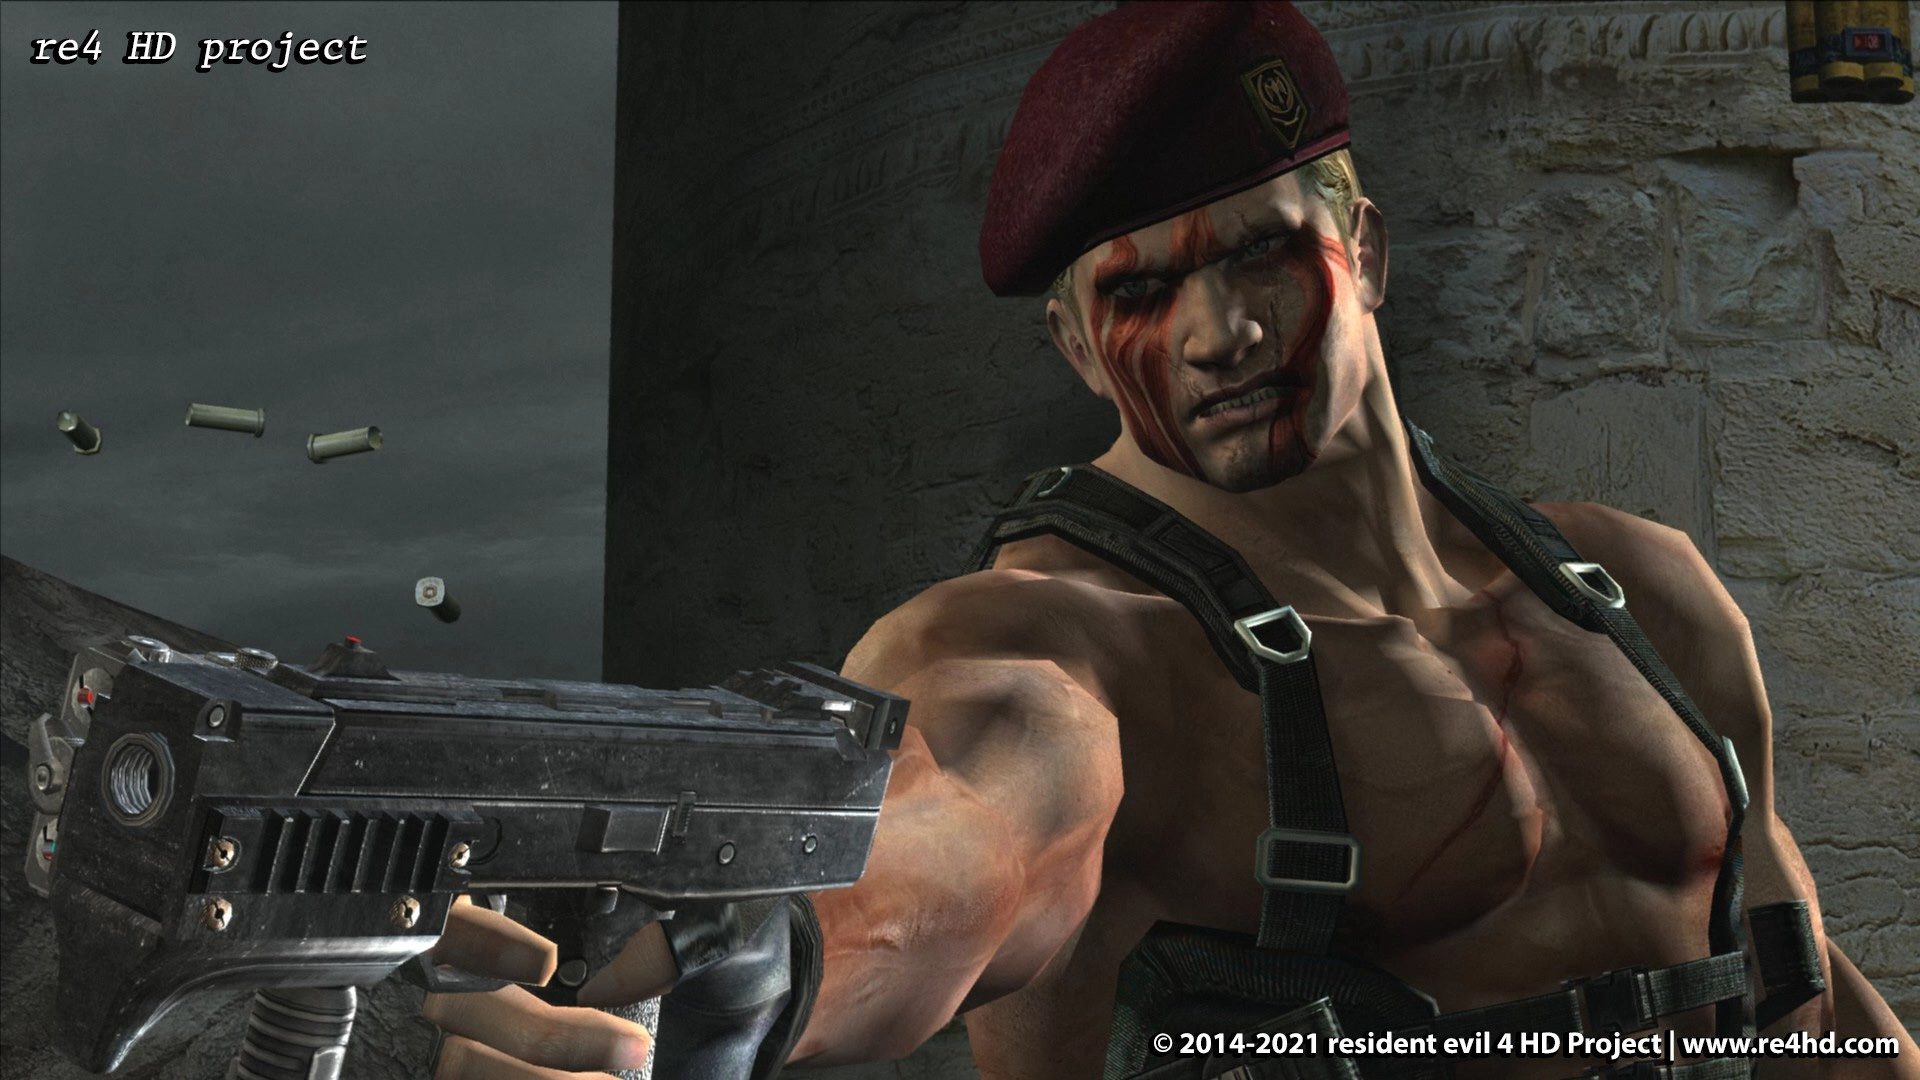 How modders rebuilt Resident Evil 4's graphics from scratch - The Verge